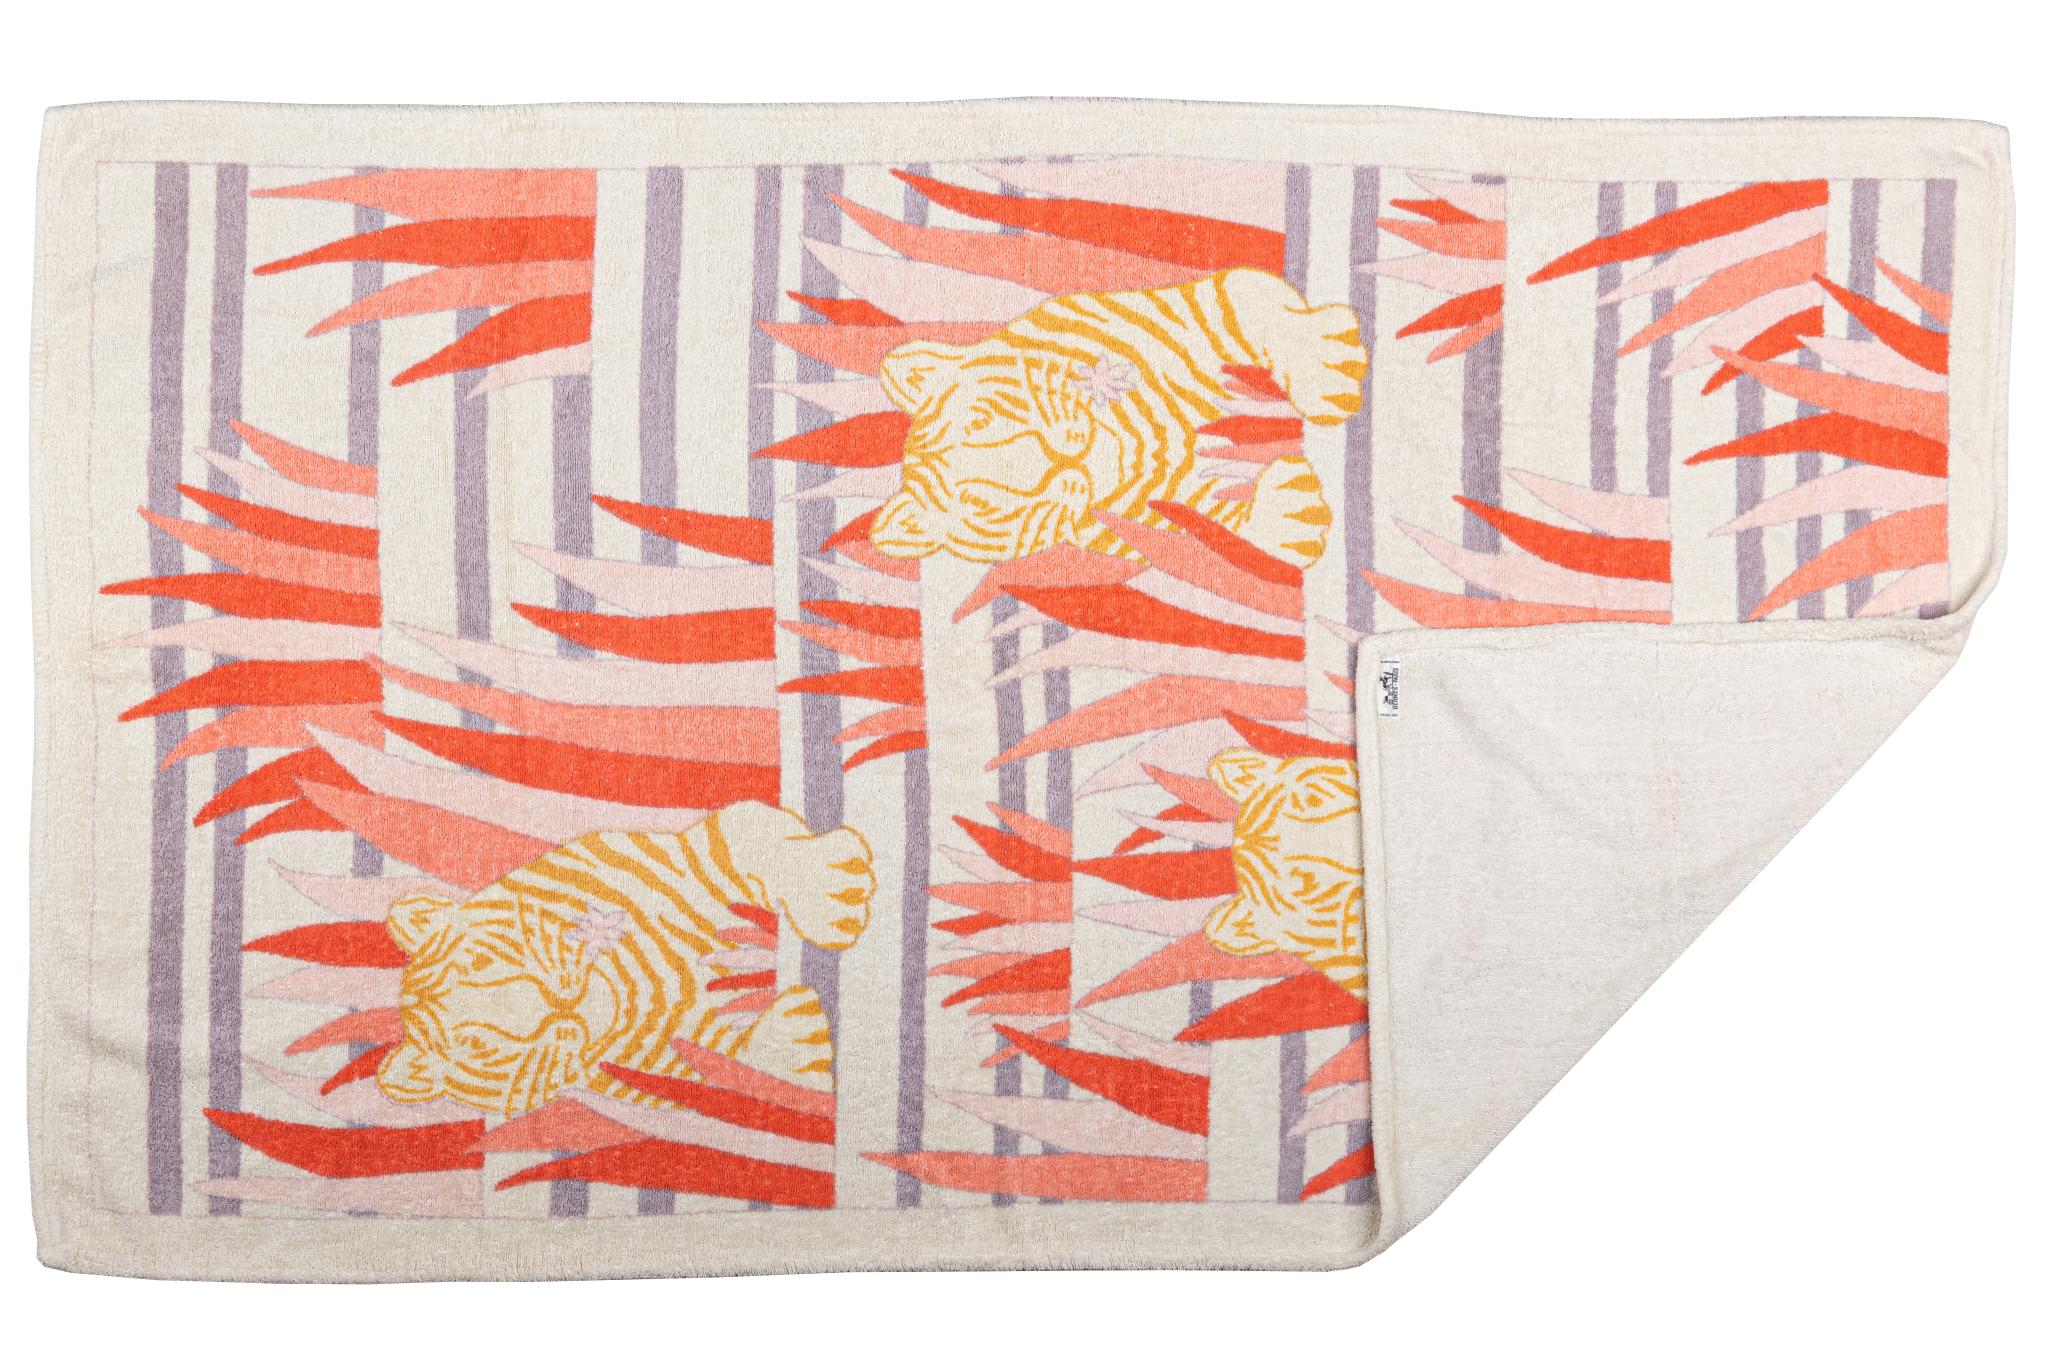 Hermès beach towel with a print of a tiger hiding behind some leaves. The piece is in excellent condition.